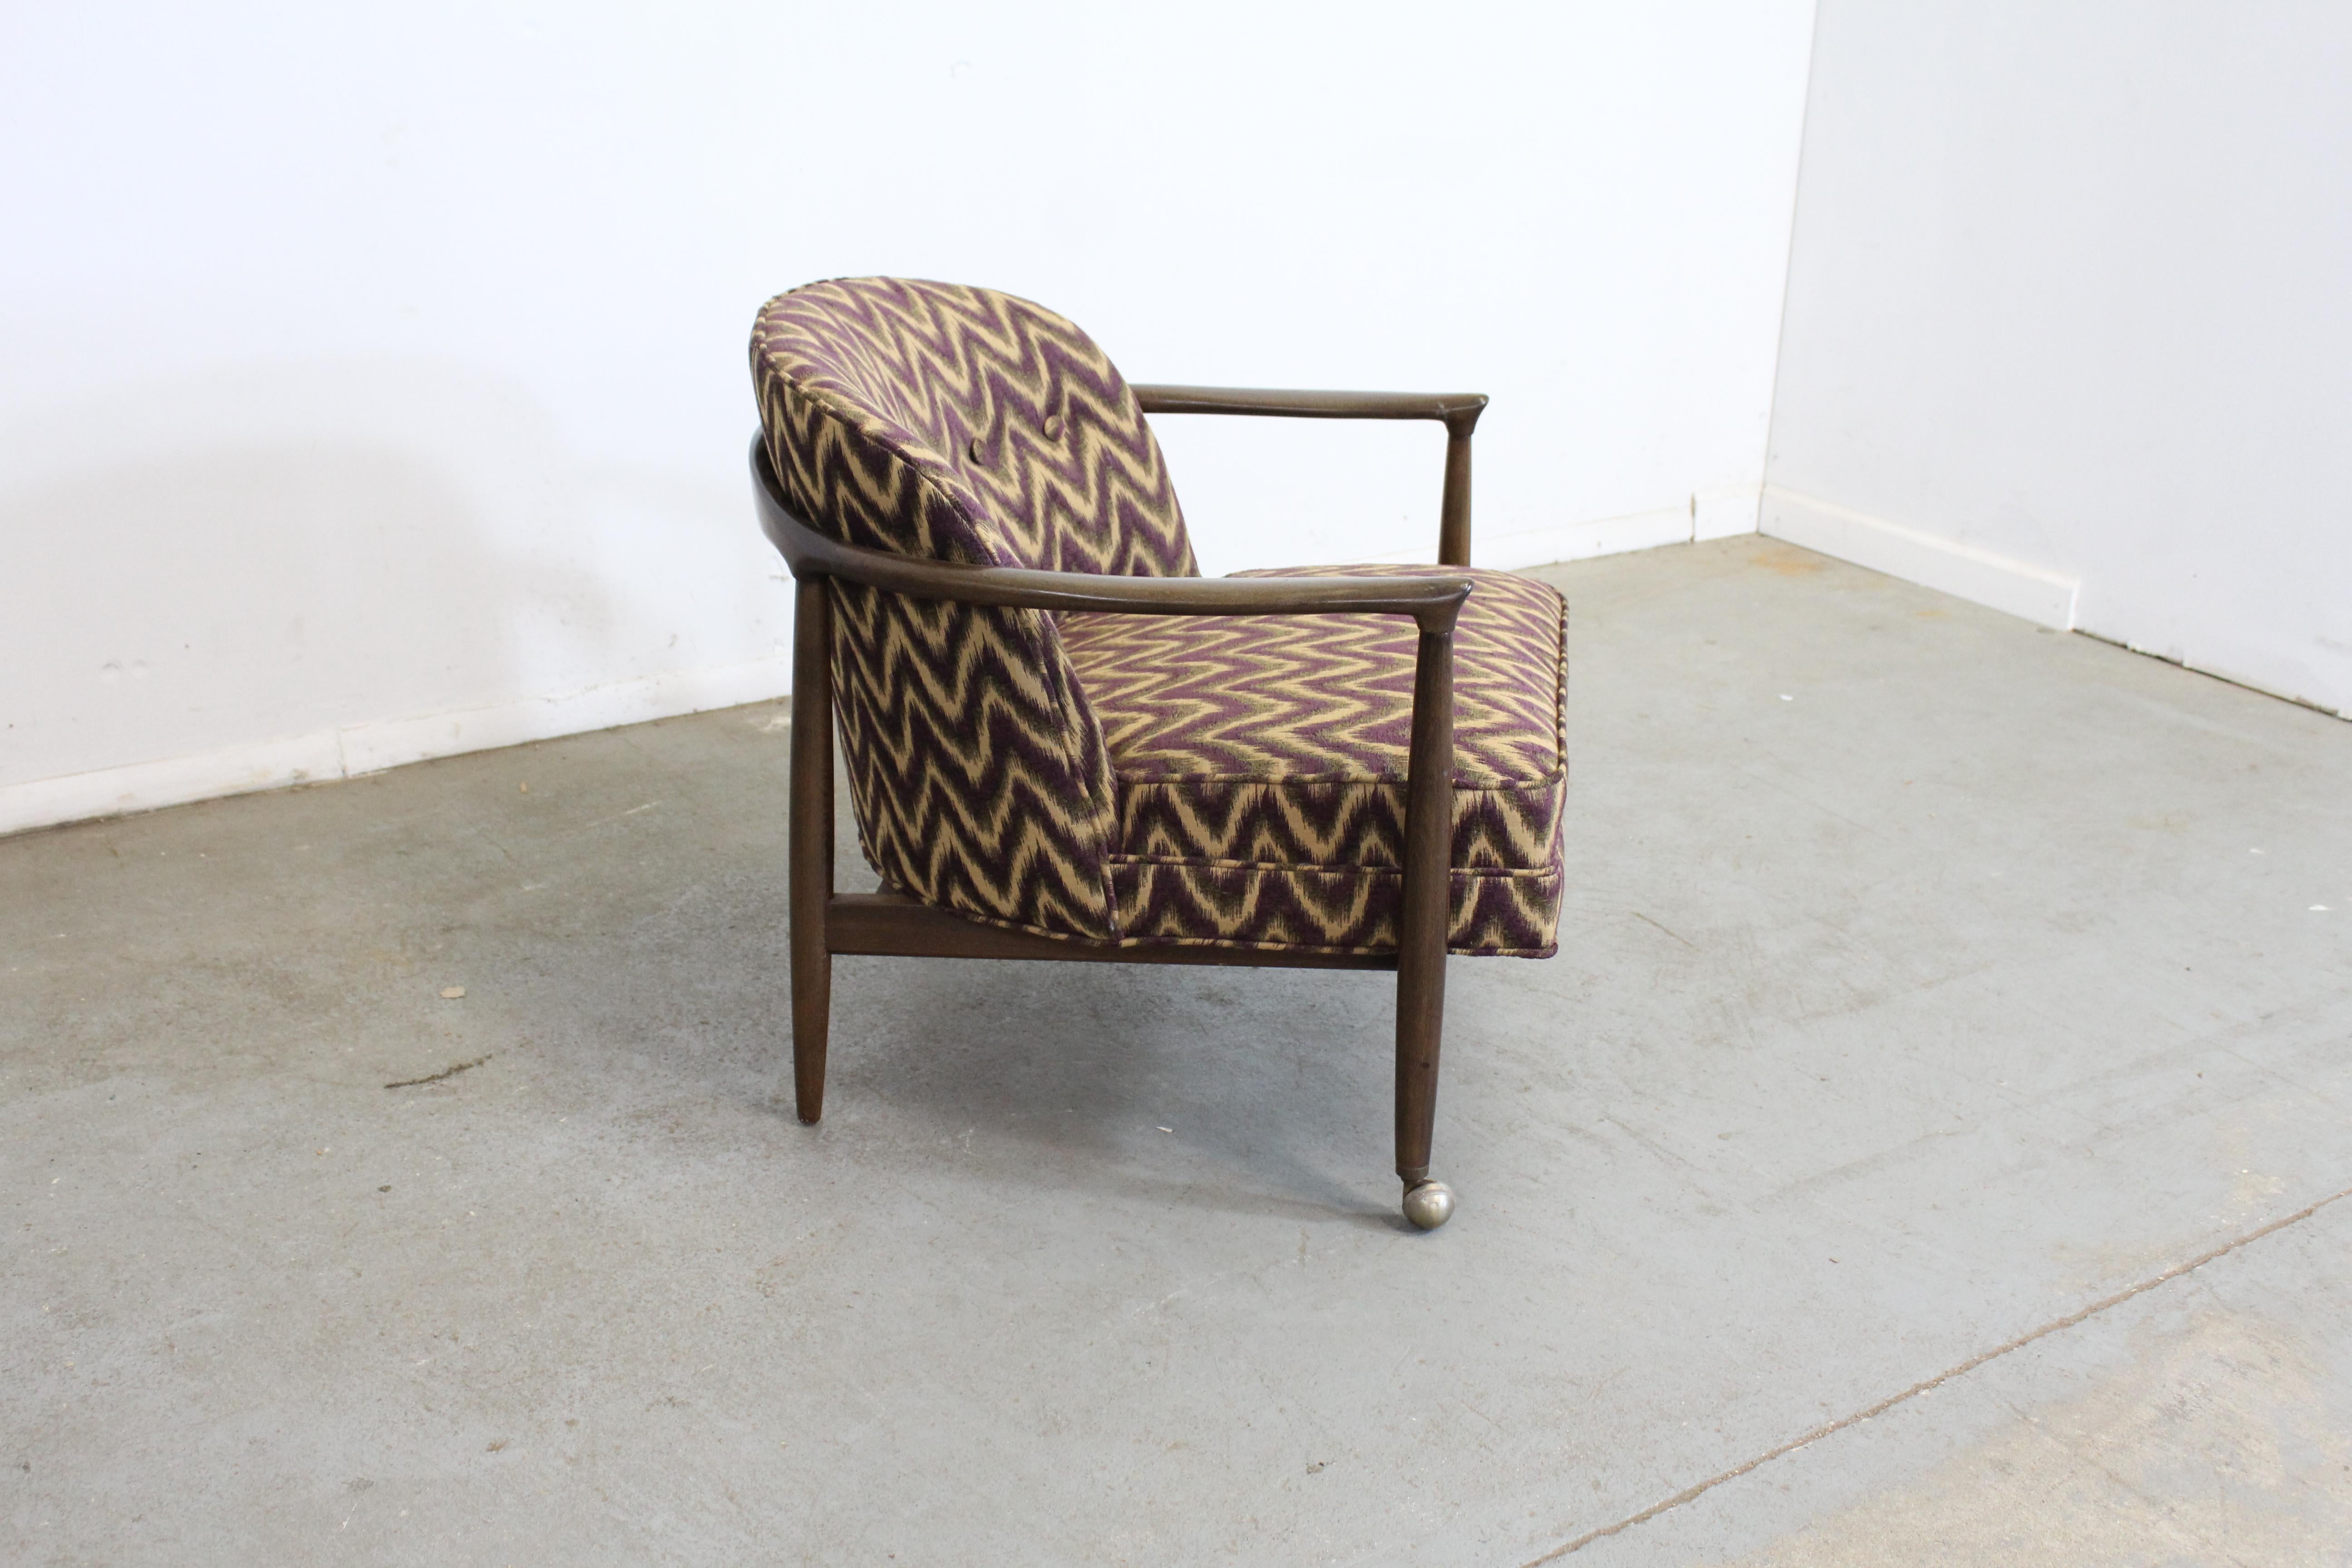 Mid-century Danish modern barrel back club chair

Offered is a vintage mid-century Danish modern chair by Finn Andersen for Selig. It is signed by Selig and made in Denmark. It features a geometric fabric in the color 